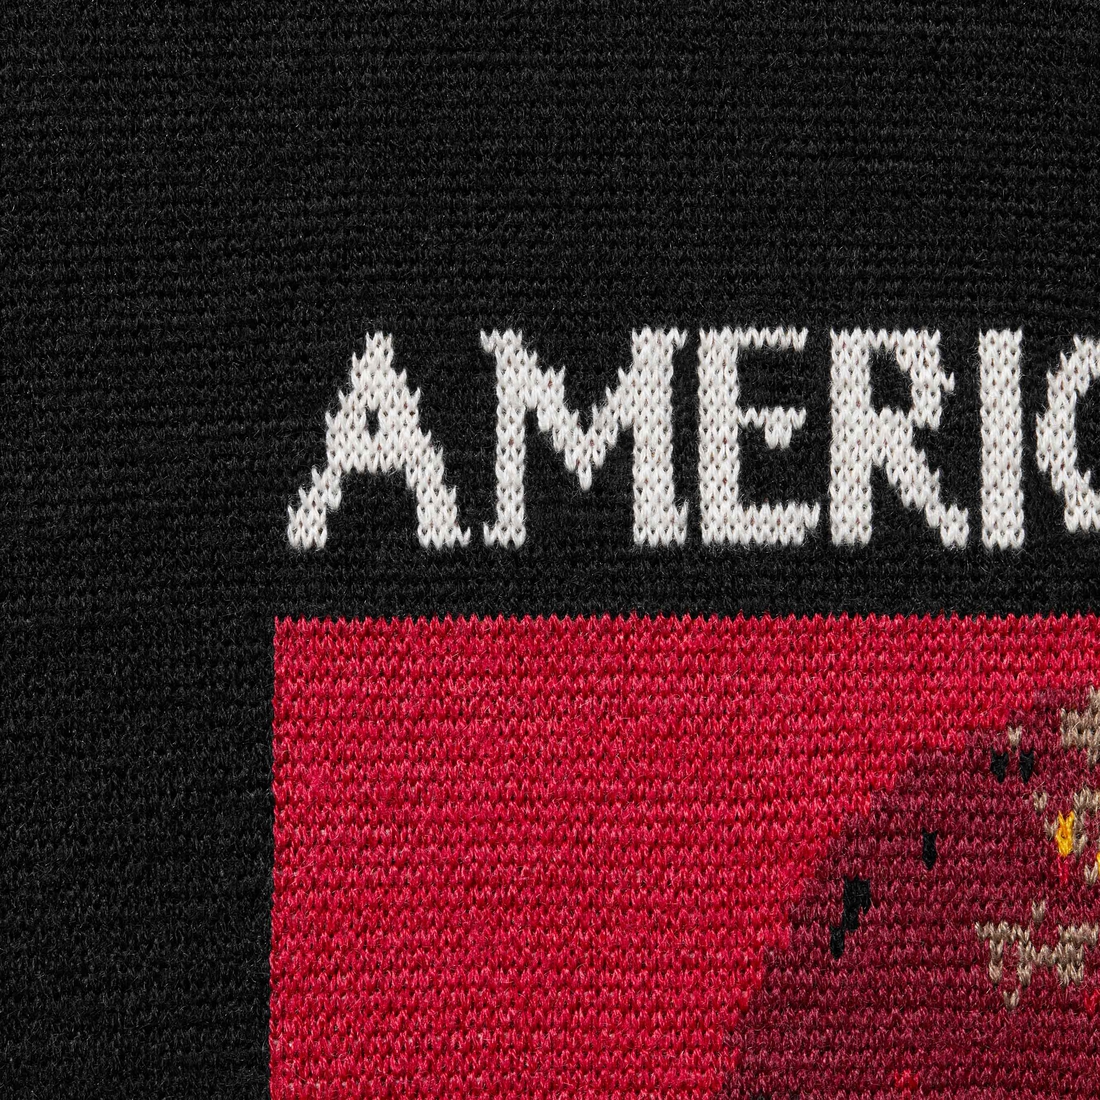 Details on American Psycho Sweater Black from fall winter 2023 (Price is $178)